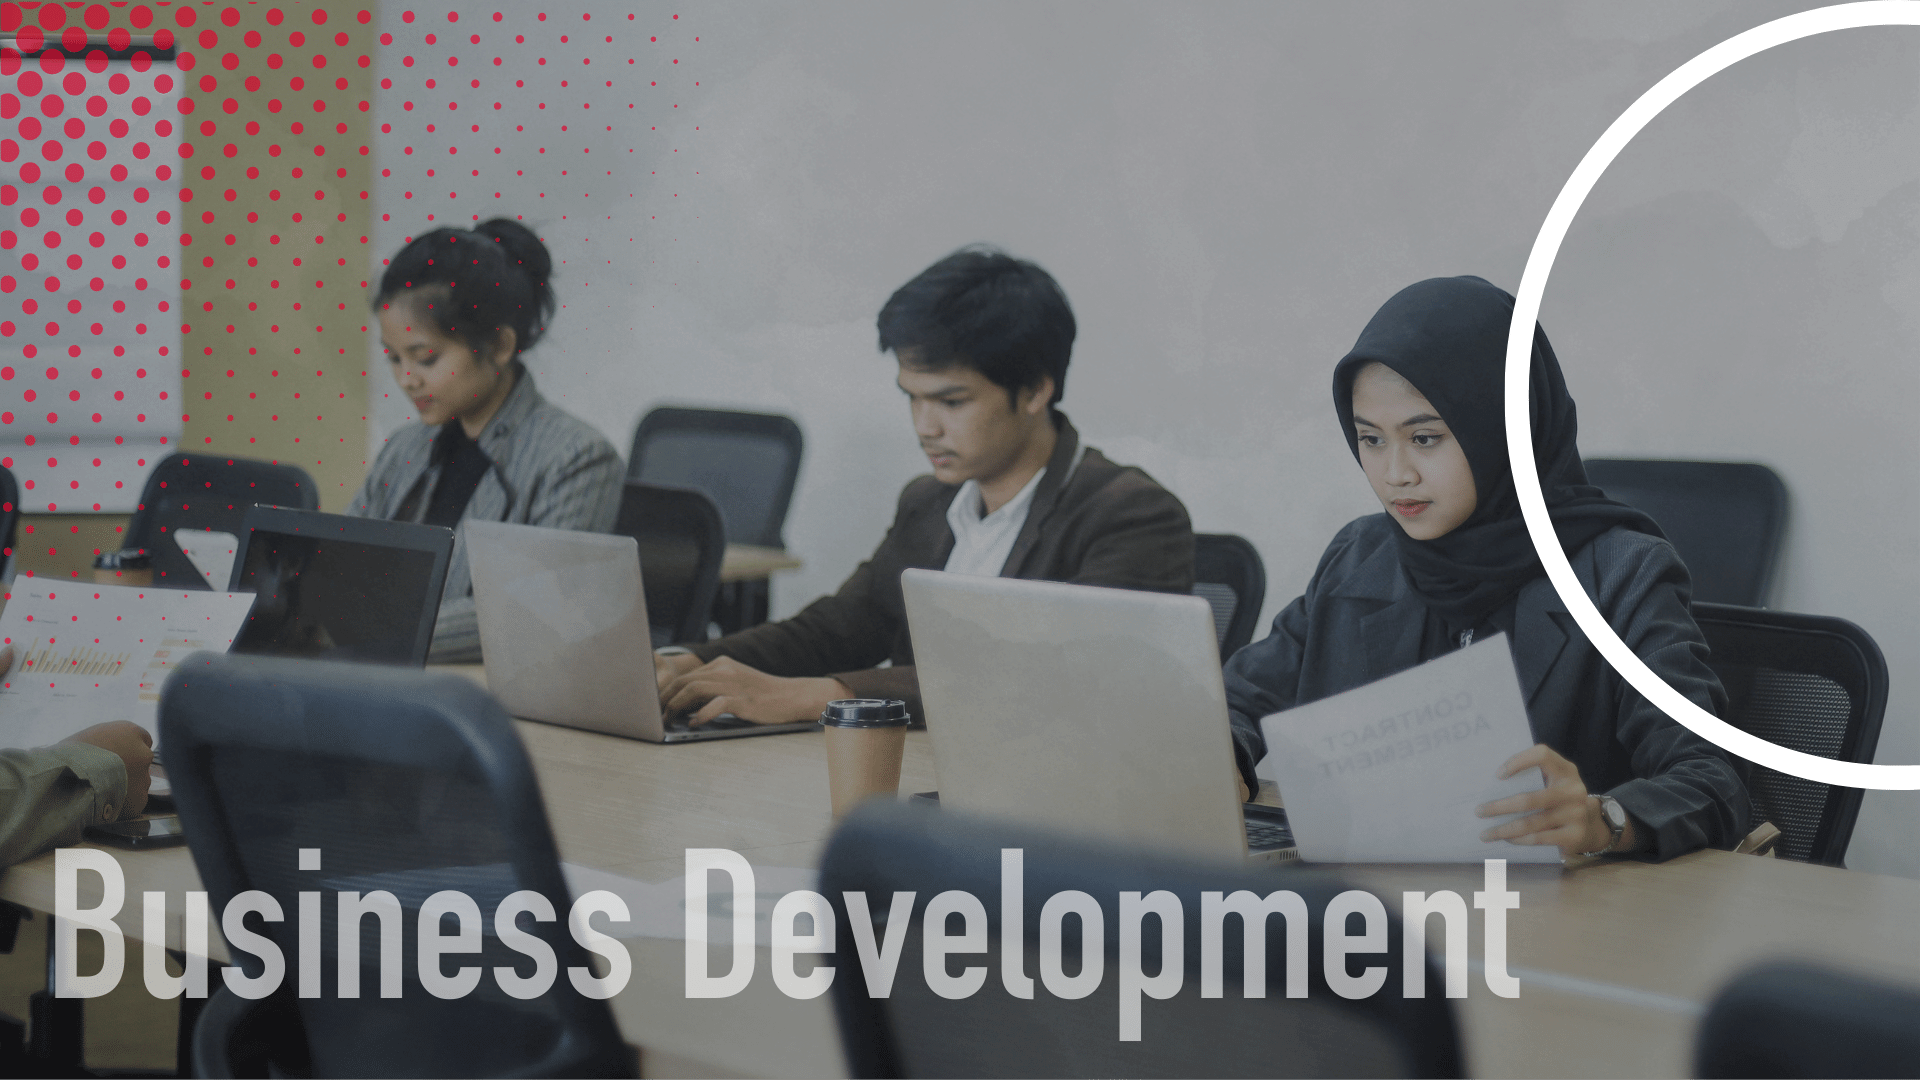 The Business Development Curriculum is designed to prepare individuals for roles focused on expanding and growing a business.